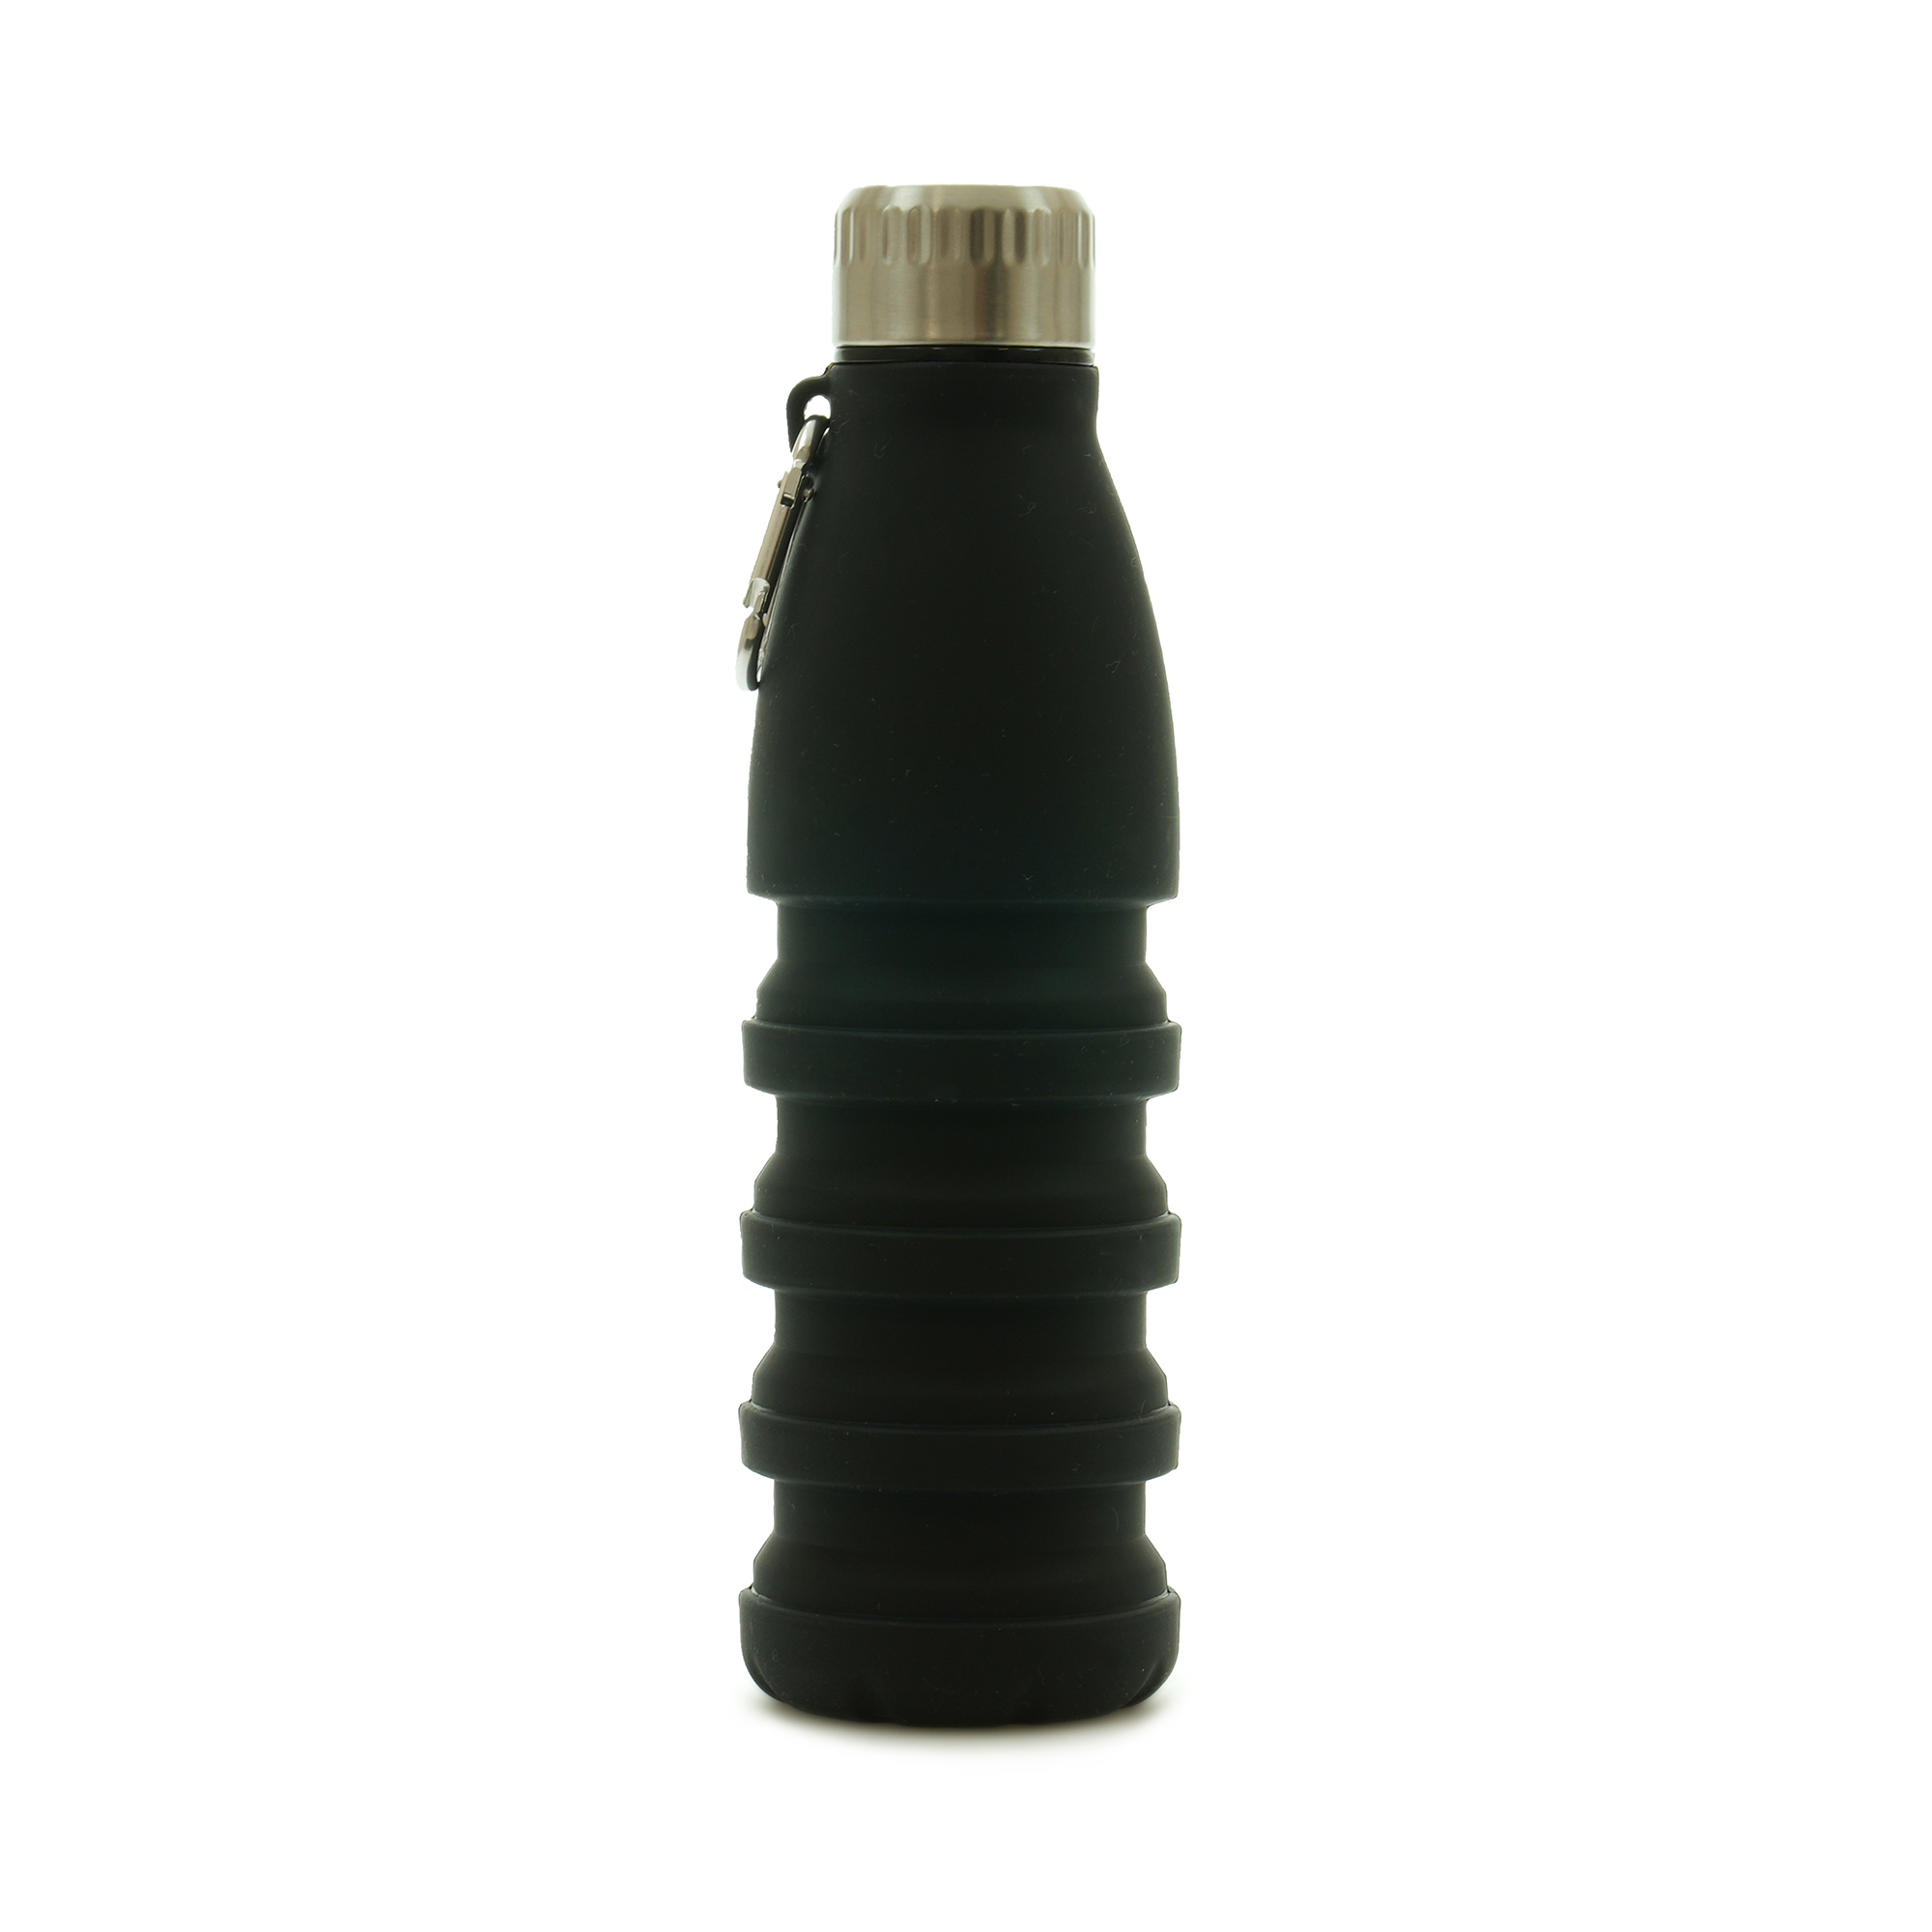 550ml black silicone drinks bottle which collapses down to travel-size and comes with an aluminium carabiner to attach to your bag or belt loop. Secure with a silver stainless steel screw on lid with black PP plastic inner.